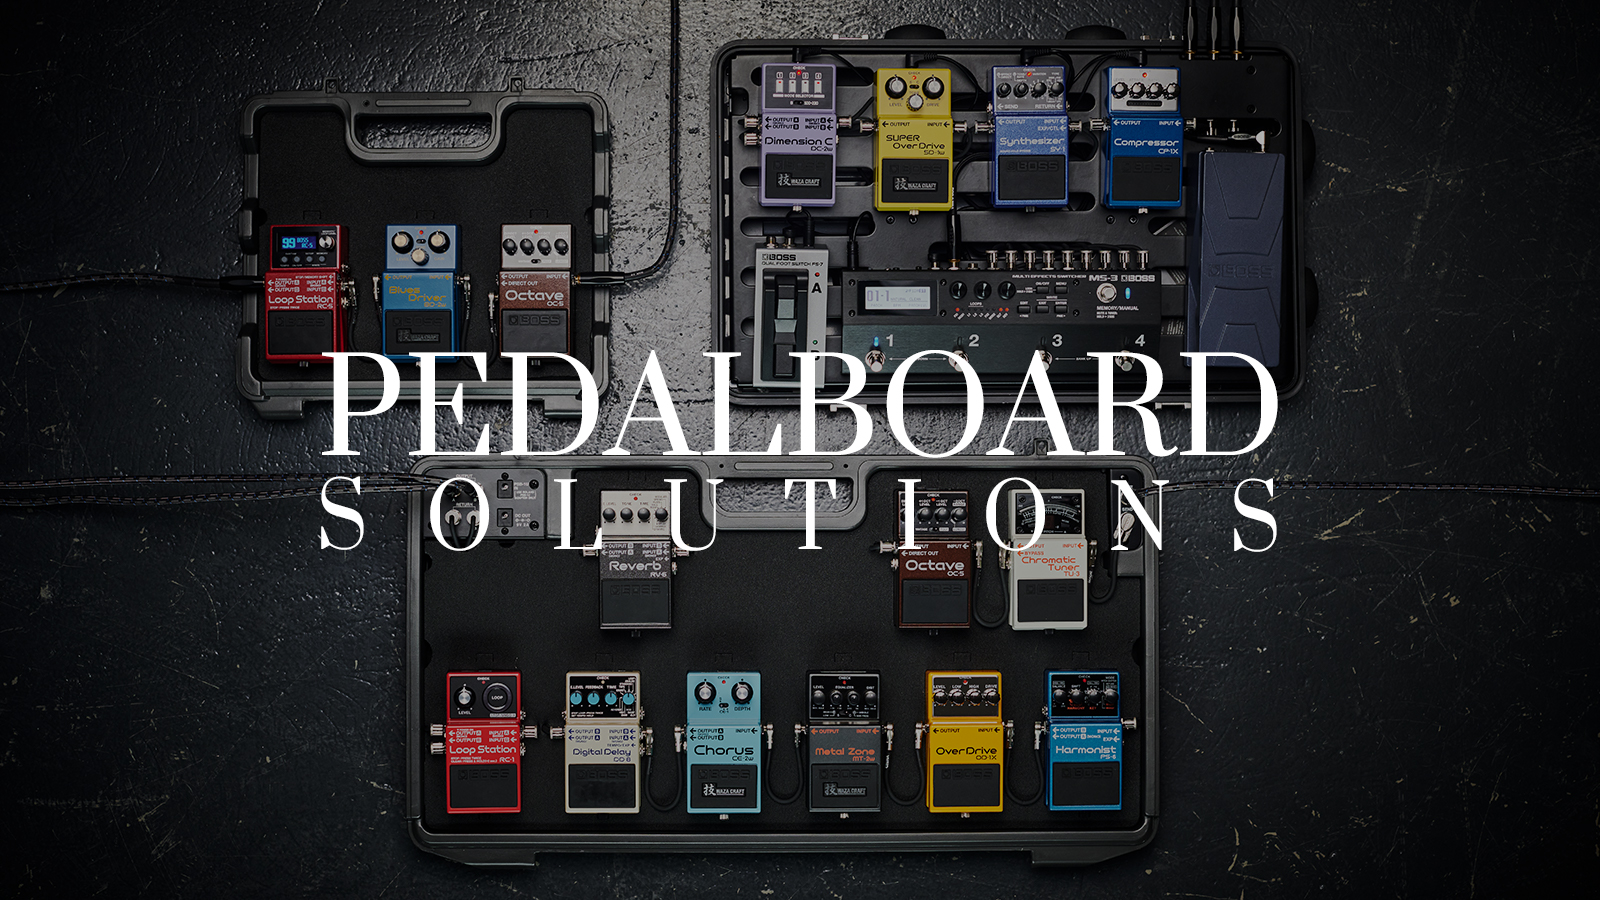 Pedalboard Solution